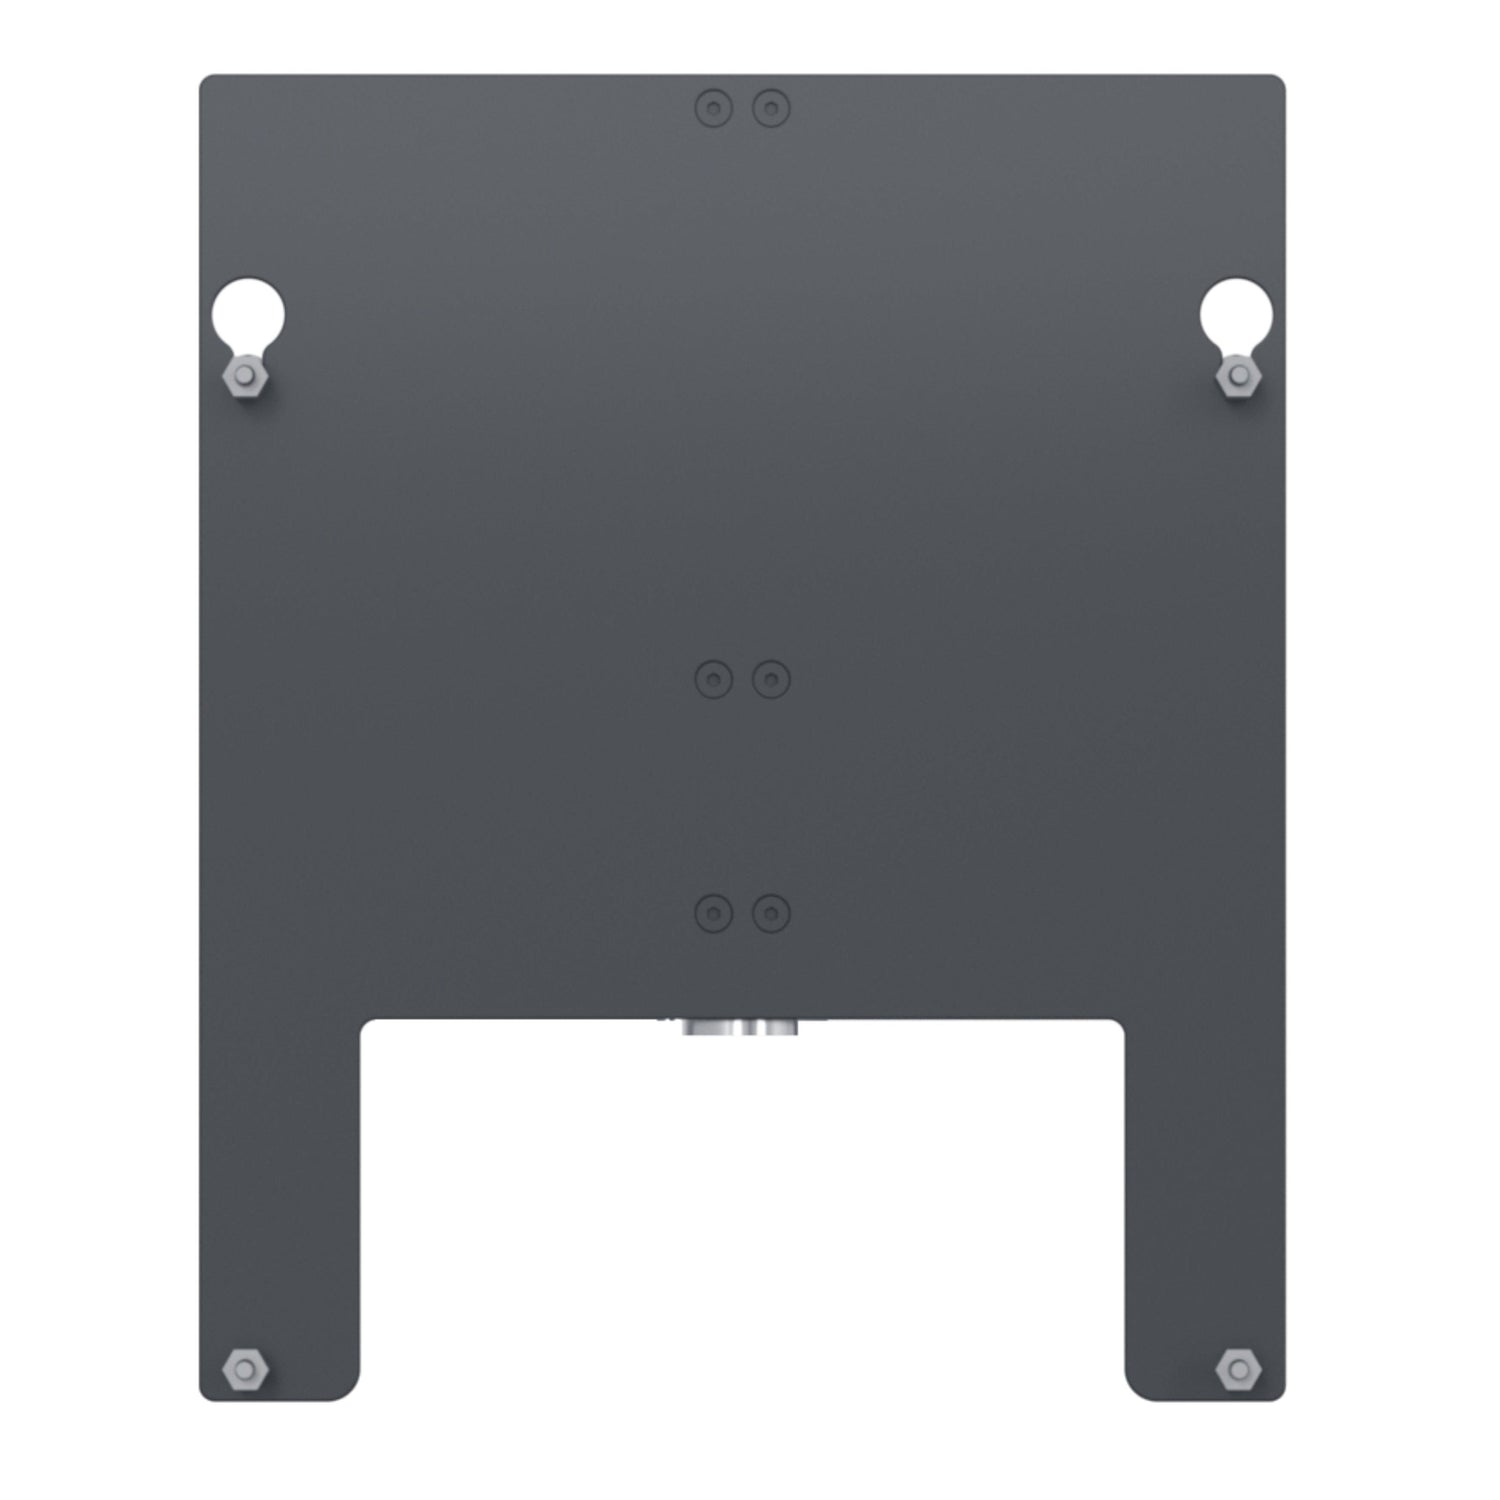 Adapter Plate for Motorised Stand